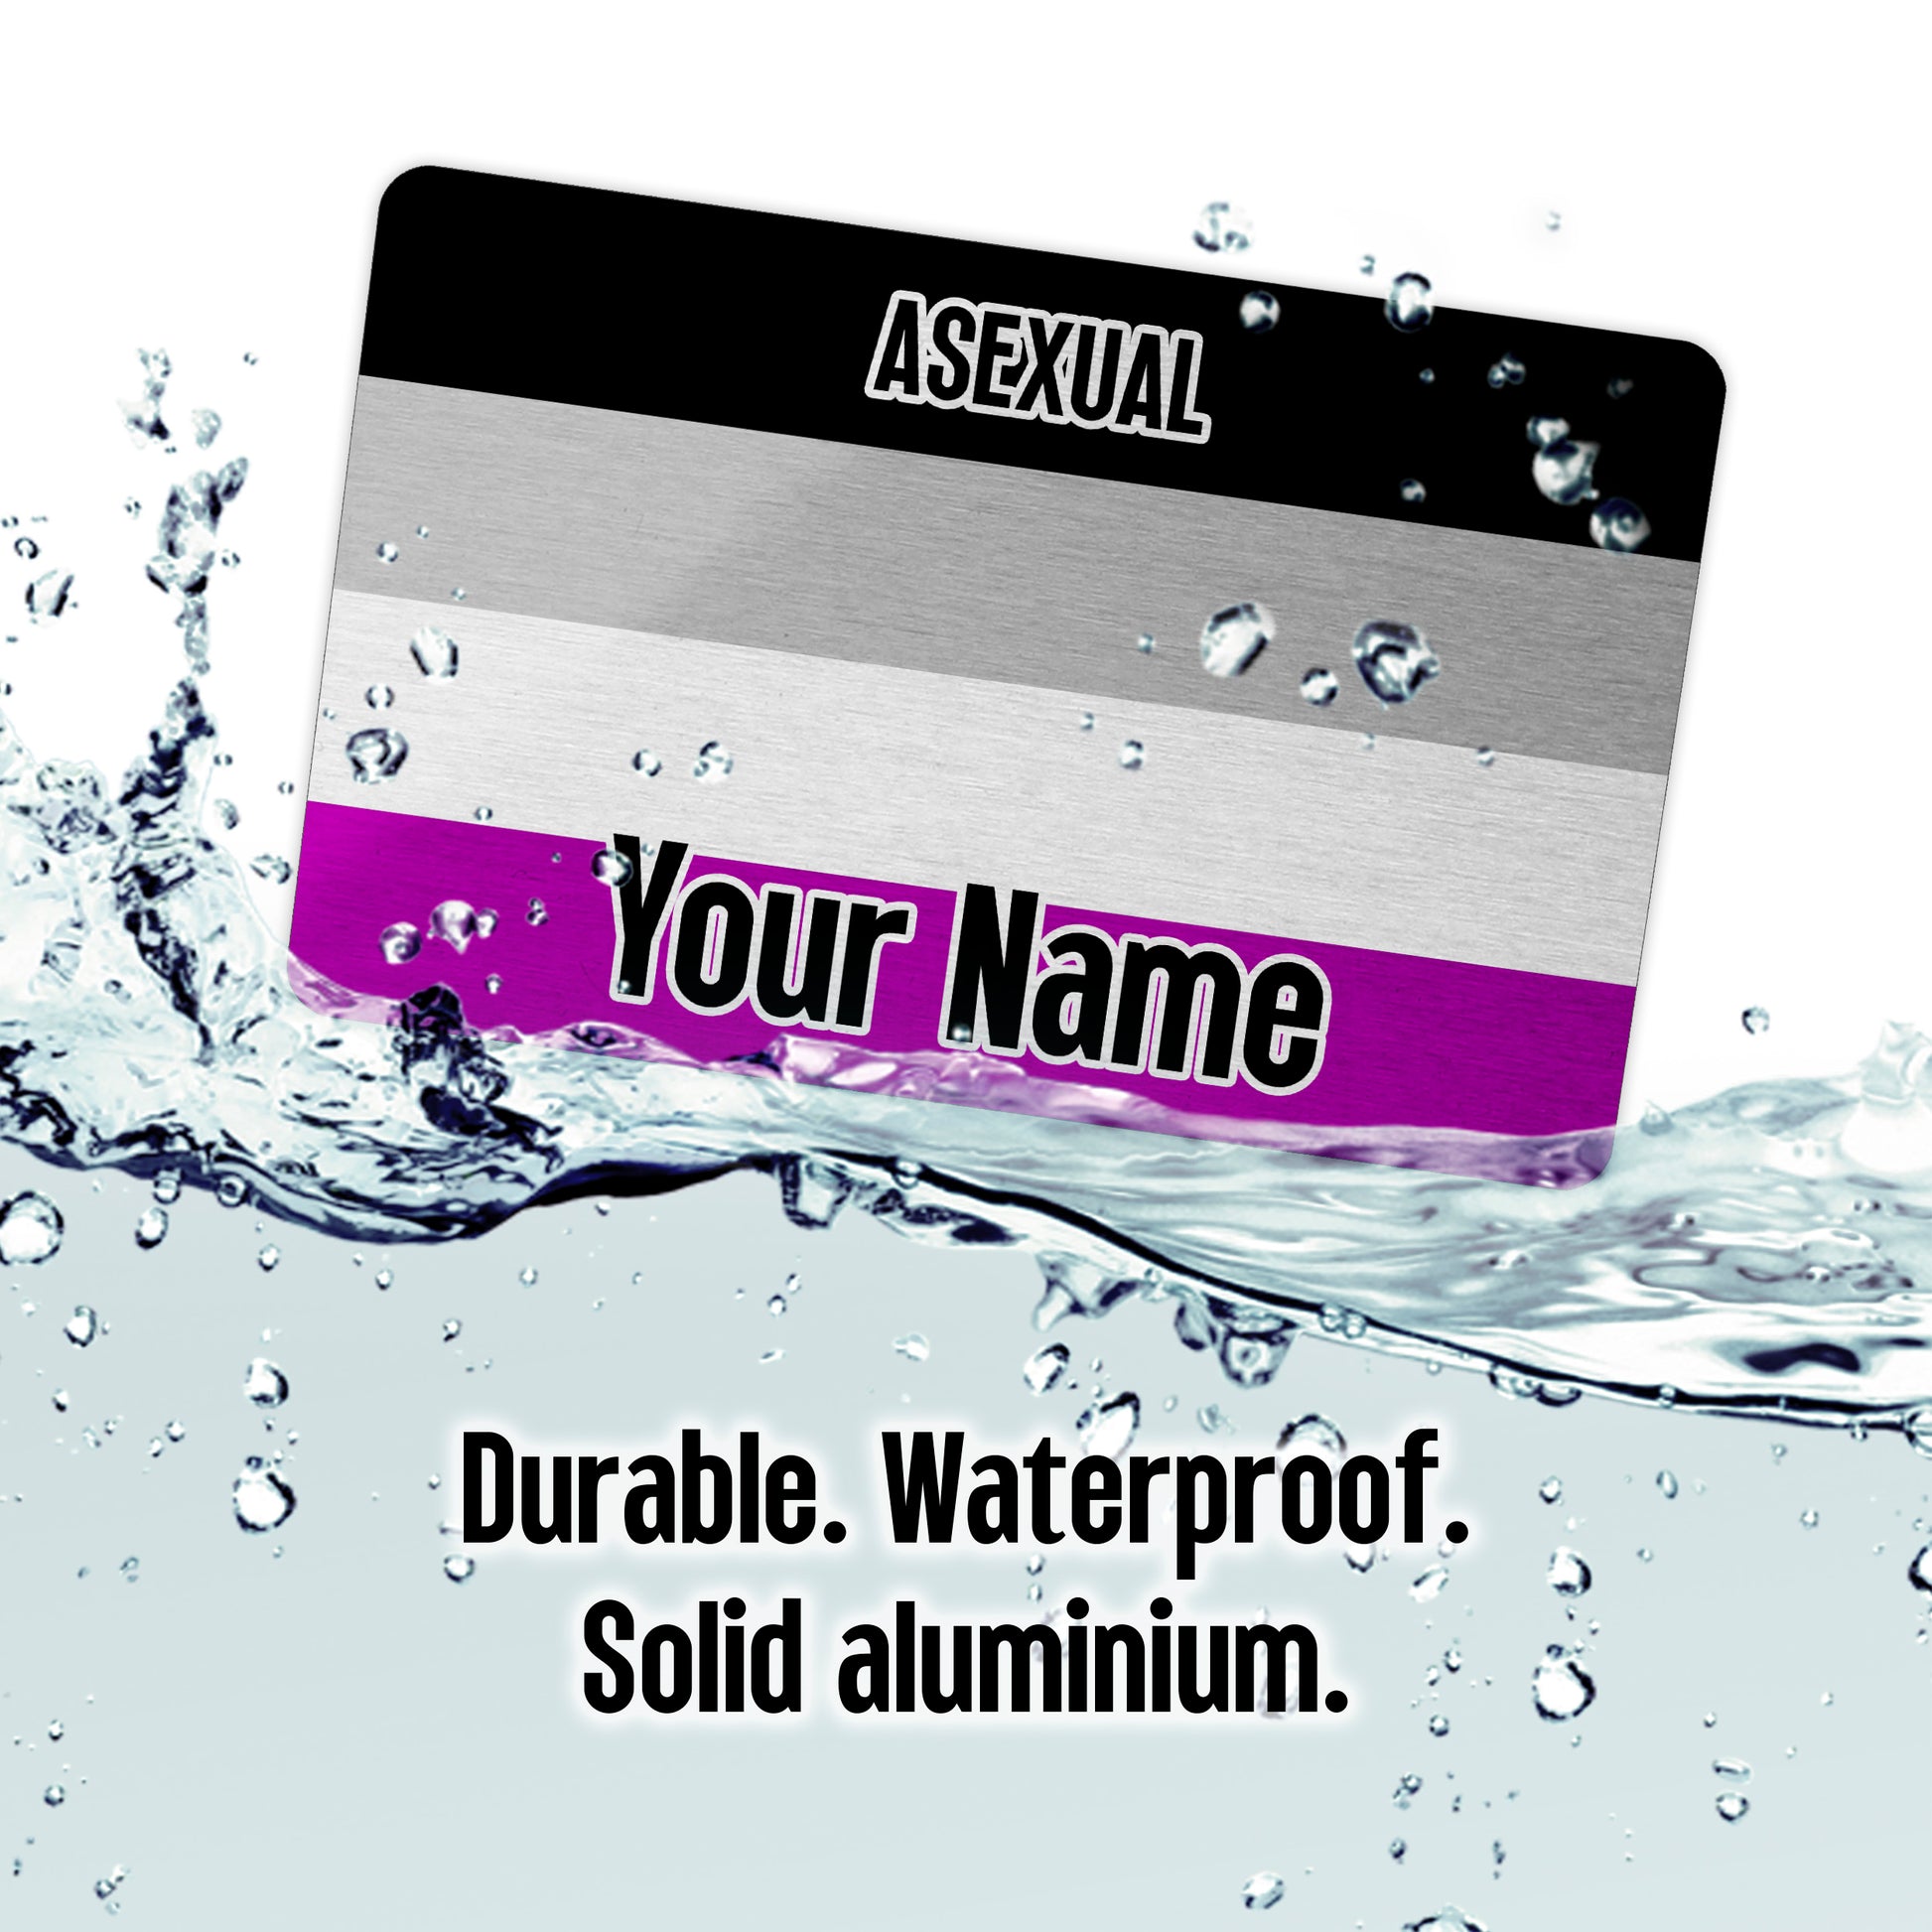 Aluminium metal wallet card personalised with your name and the asexual pride flag